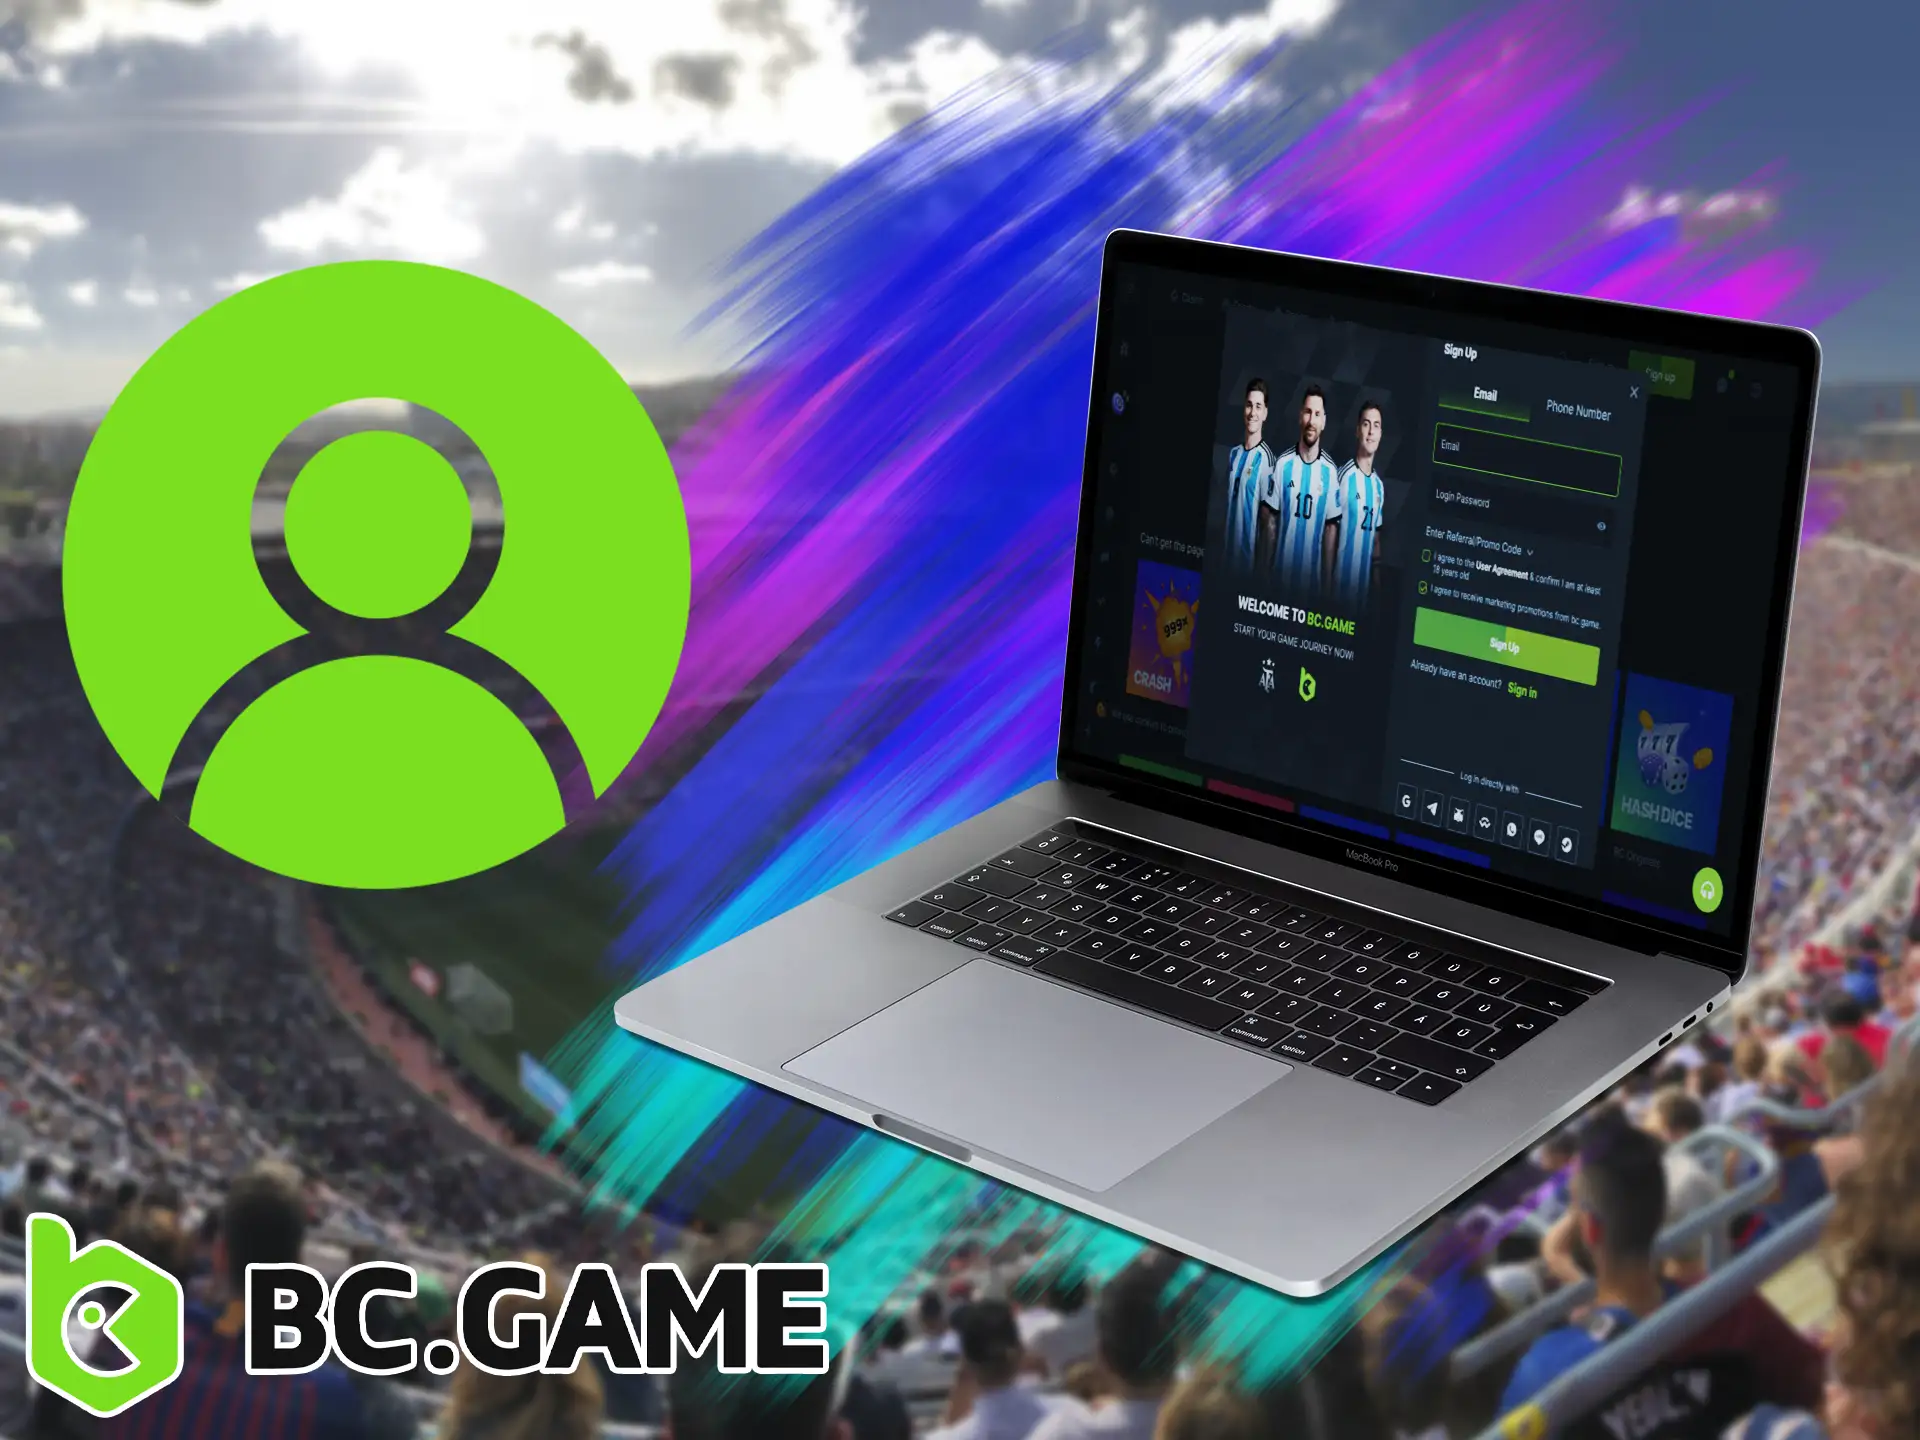 In order to start placing bets in BC GAME all users from Bangladesh must create an account, this rule is common for all players.